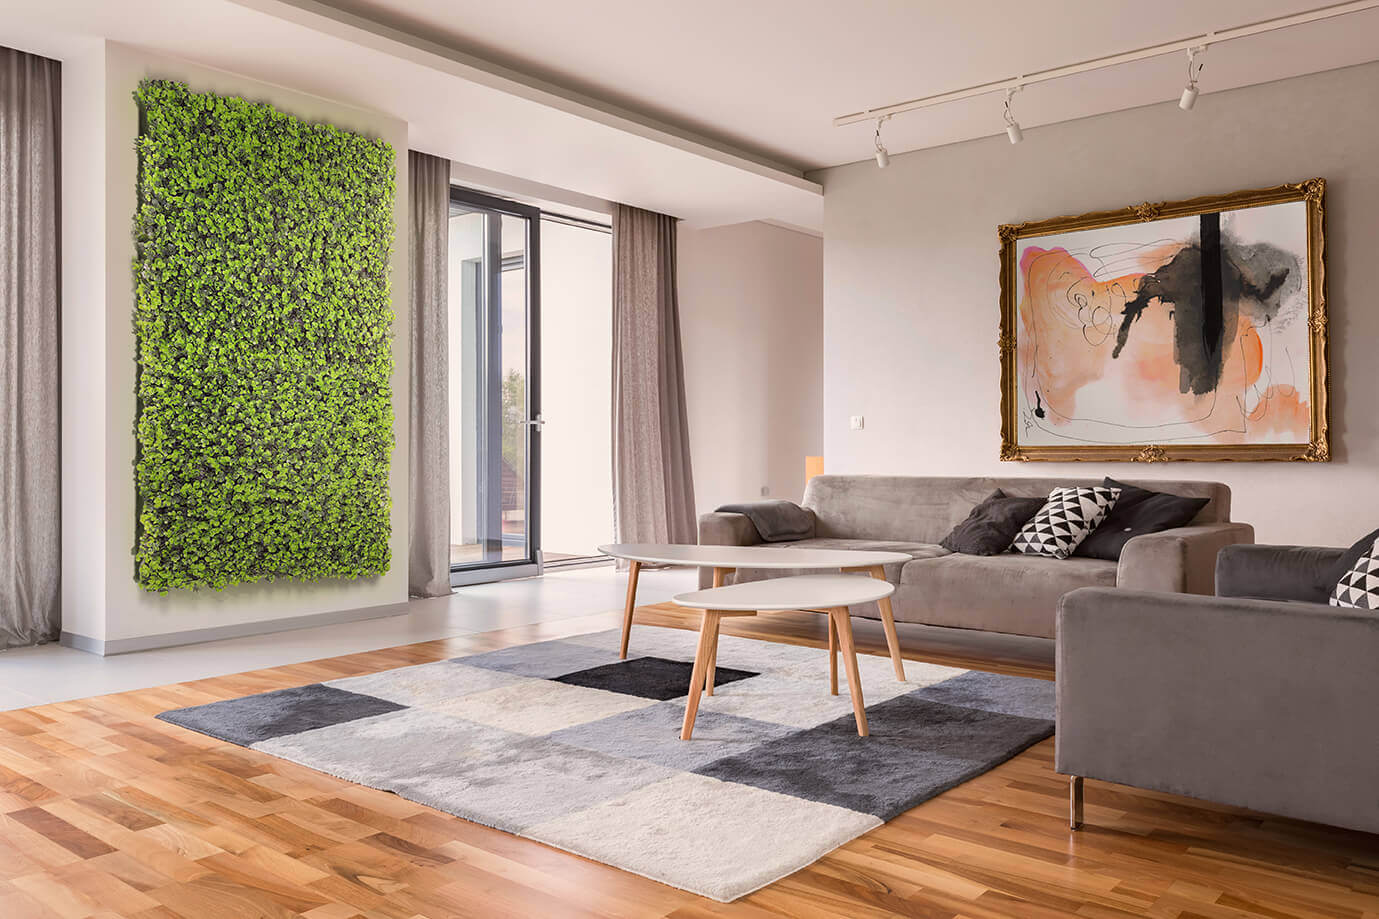 Living room decorated with an artificial green wall